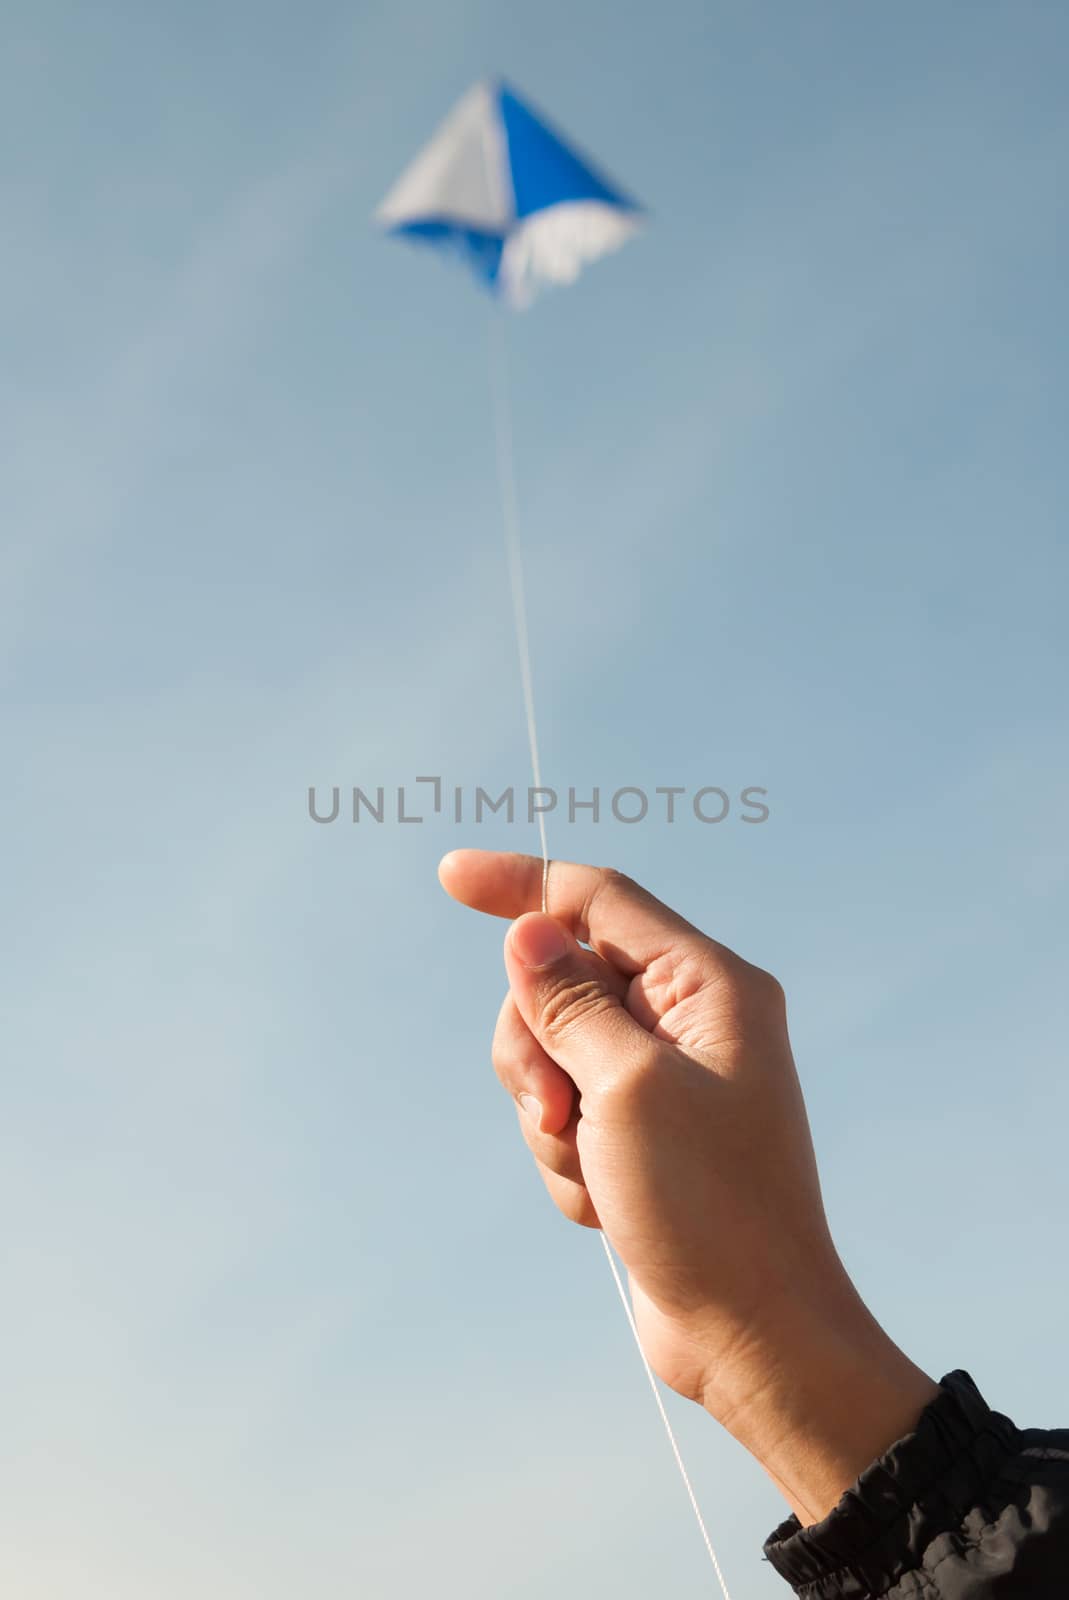 kite flying in a blue sky and clouds